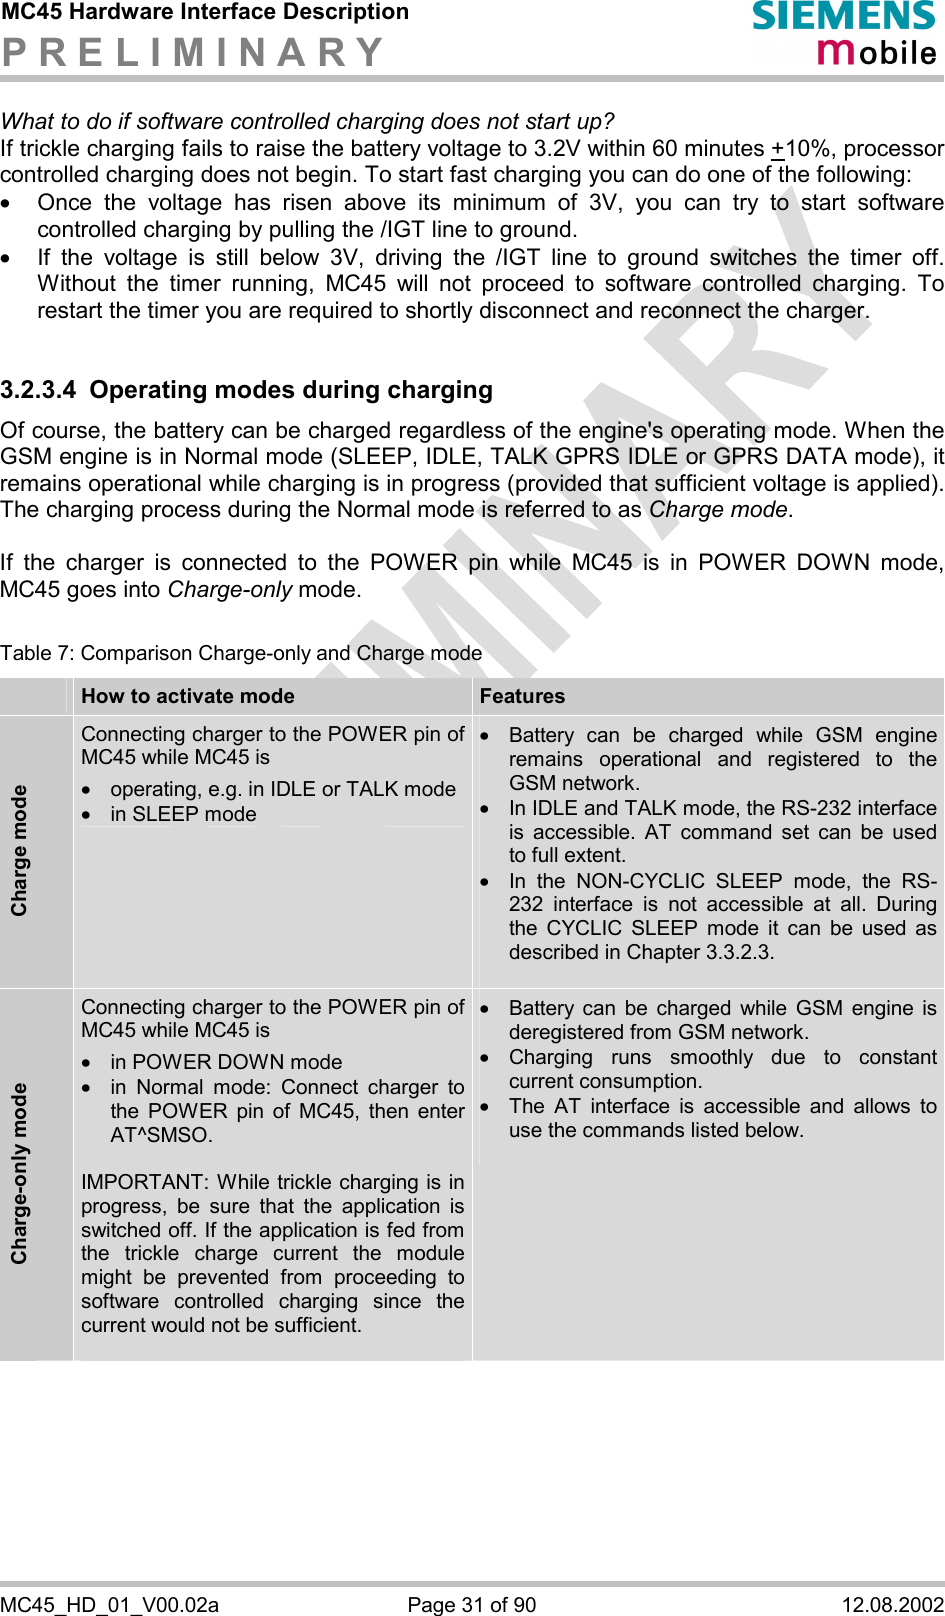 MC45 Hardware Interface Description P R E L I M I N A R Y      MC45_HD_01_V00.02a  Page 31 of 90  12.08.2002 What to do if software controlled charging does not start up? If trickle charging fails to raise the battery voltage to 3.2V within 60 minutes +10%, processor controlled charging does not begin. To start fast charging you can do one of the following:  ·  Once the voltage has risen above its minimum of 3V, you can try to start software controlled charging by pulling the /IGT line to ground.  ·  If the voltage is still below 3V, driving the /IGT line to ground switches the timer off. Without the timer running, MC45 will not proceed to software controlled charging. To restart the timer you are required to shortly disconnect and reconnect the charger.  3.2.3.4  Operating modes during charging Of course, the battery can be charged regardless of the engine&apos;s operating mode. When the GSM engine is in Normal mode (SLEEP, IDLE, TALK GPRS IDLE or GPRS DATA mode), it remains operational while charging is in progress (provided that sufficient voltage is applied). The charging process during the Normal mode is referred to as Charge mode.   If the charger is connected to the POWER pin while MC45 is in POWER DOWN mode, MC45 goes into Charge-only mode.   Table 7: Comparison Charge-only and Charge mode  How to activate mode  Features Charge mode Connecting charger to the POWER pin of MC45 while MC45 is ·  operating, e.g. in IDLE or TALK mode ·  in SLEEP mode ·  Battery can be charged while GSM engine remains operational and registered to the GSM network. ·  In IDLE and TALK mode, the RS-232 interface is accessible. AT command set can be used to full extent. ·  In the NON-CYCLIC SLEEP mode, the RS-232 interface is not accessible at all. During the CYCLIC SLEEP mode it can be used as described in Chapter 3.3.2.3.  Charge-only mode Connecting charger to the POWER pin of MC45 while MC45 is ·  in POWER DOWN mode ·  in Normal mode: Connect charger to the POWER pin of MC45, then enter AT^SMSO.  IMPORTANT: While trickle charging is in progress, be sure that the application is switched off. If the application is fed from the trickle charge current the module might be prevented from proceeding to software controlled charging since the current would not be sufficient.   ·  Battery can be charged while GSM engine is deregistered from GSM network. ·  Charging runs smoothly due to constant current consumption. ·  The AT interface is accessible and allows to use the commands listed below.     